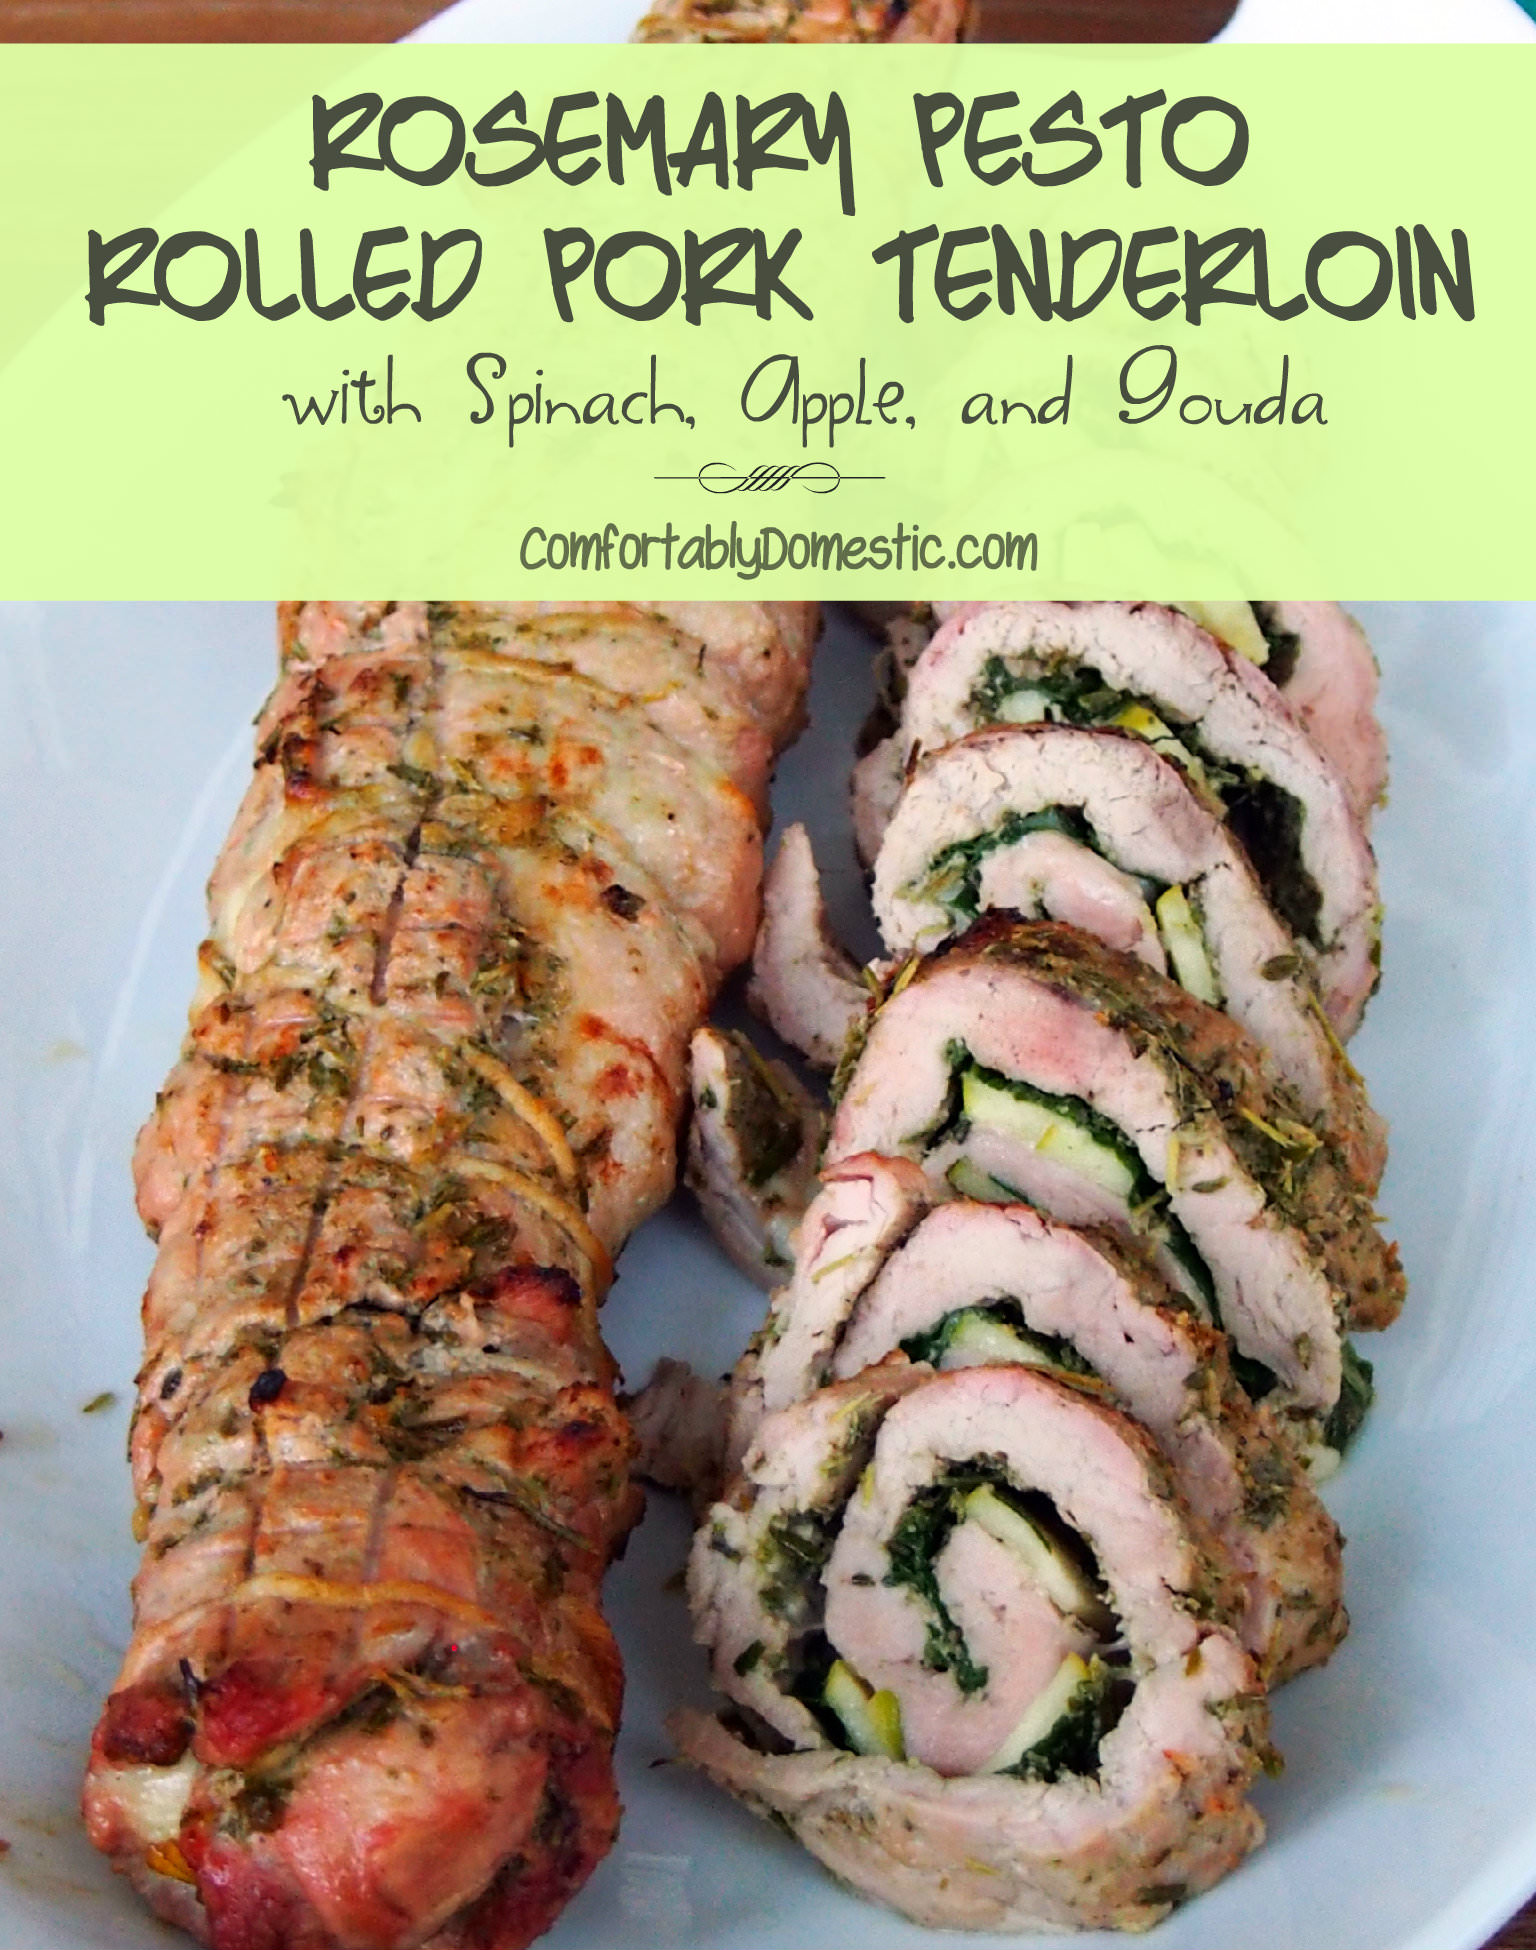 Rolled Pork Tenderloin with Spinach, Apple, and Gouda | ComfortablyDomestic.com